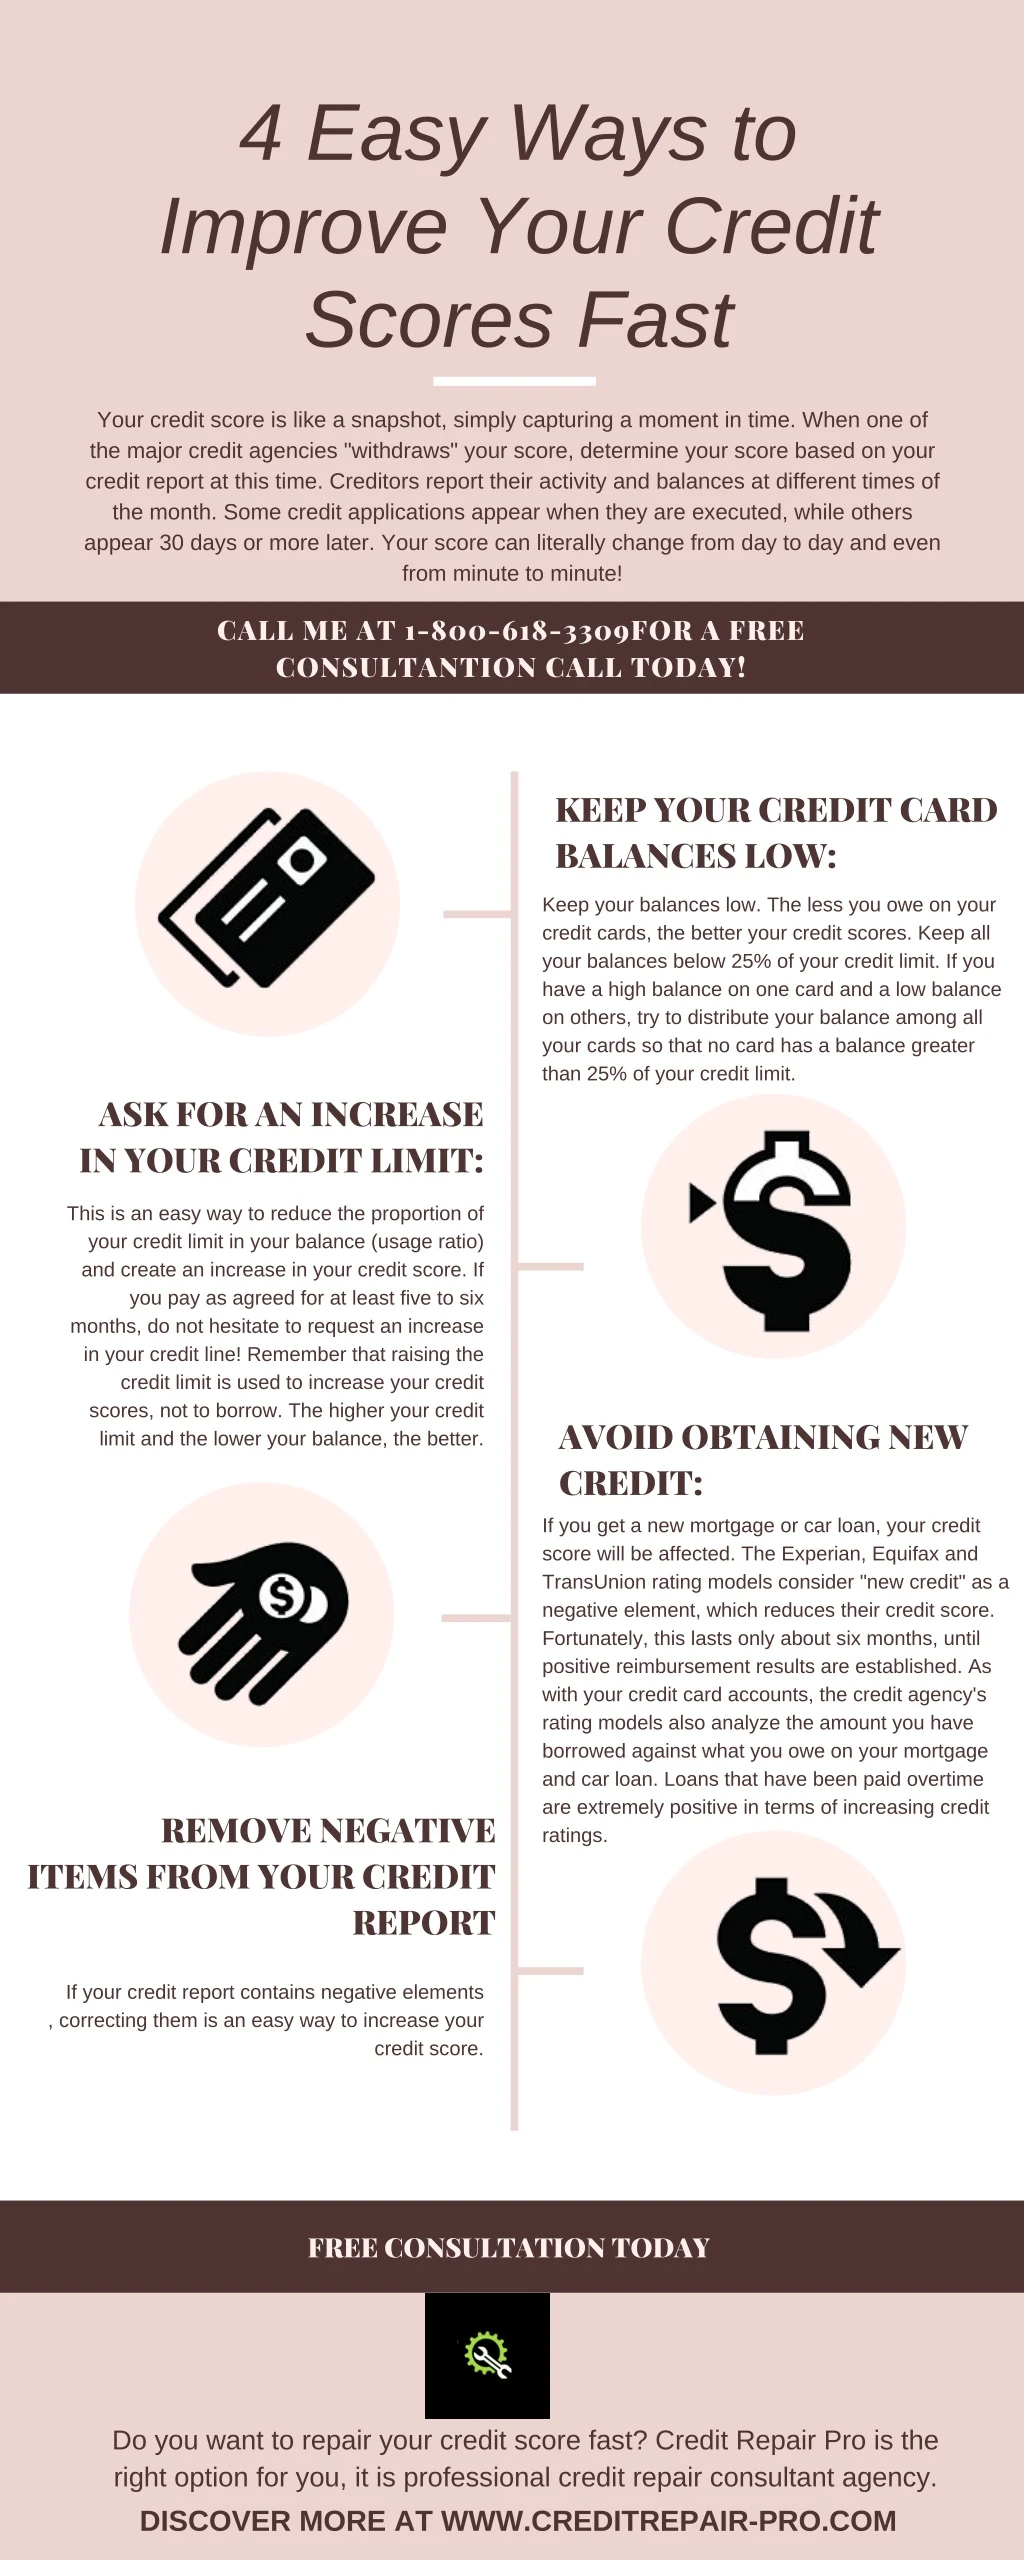 4 easy ways to improve your credit scores fast